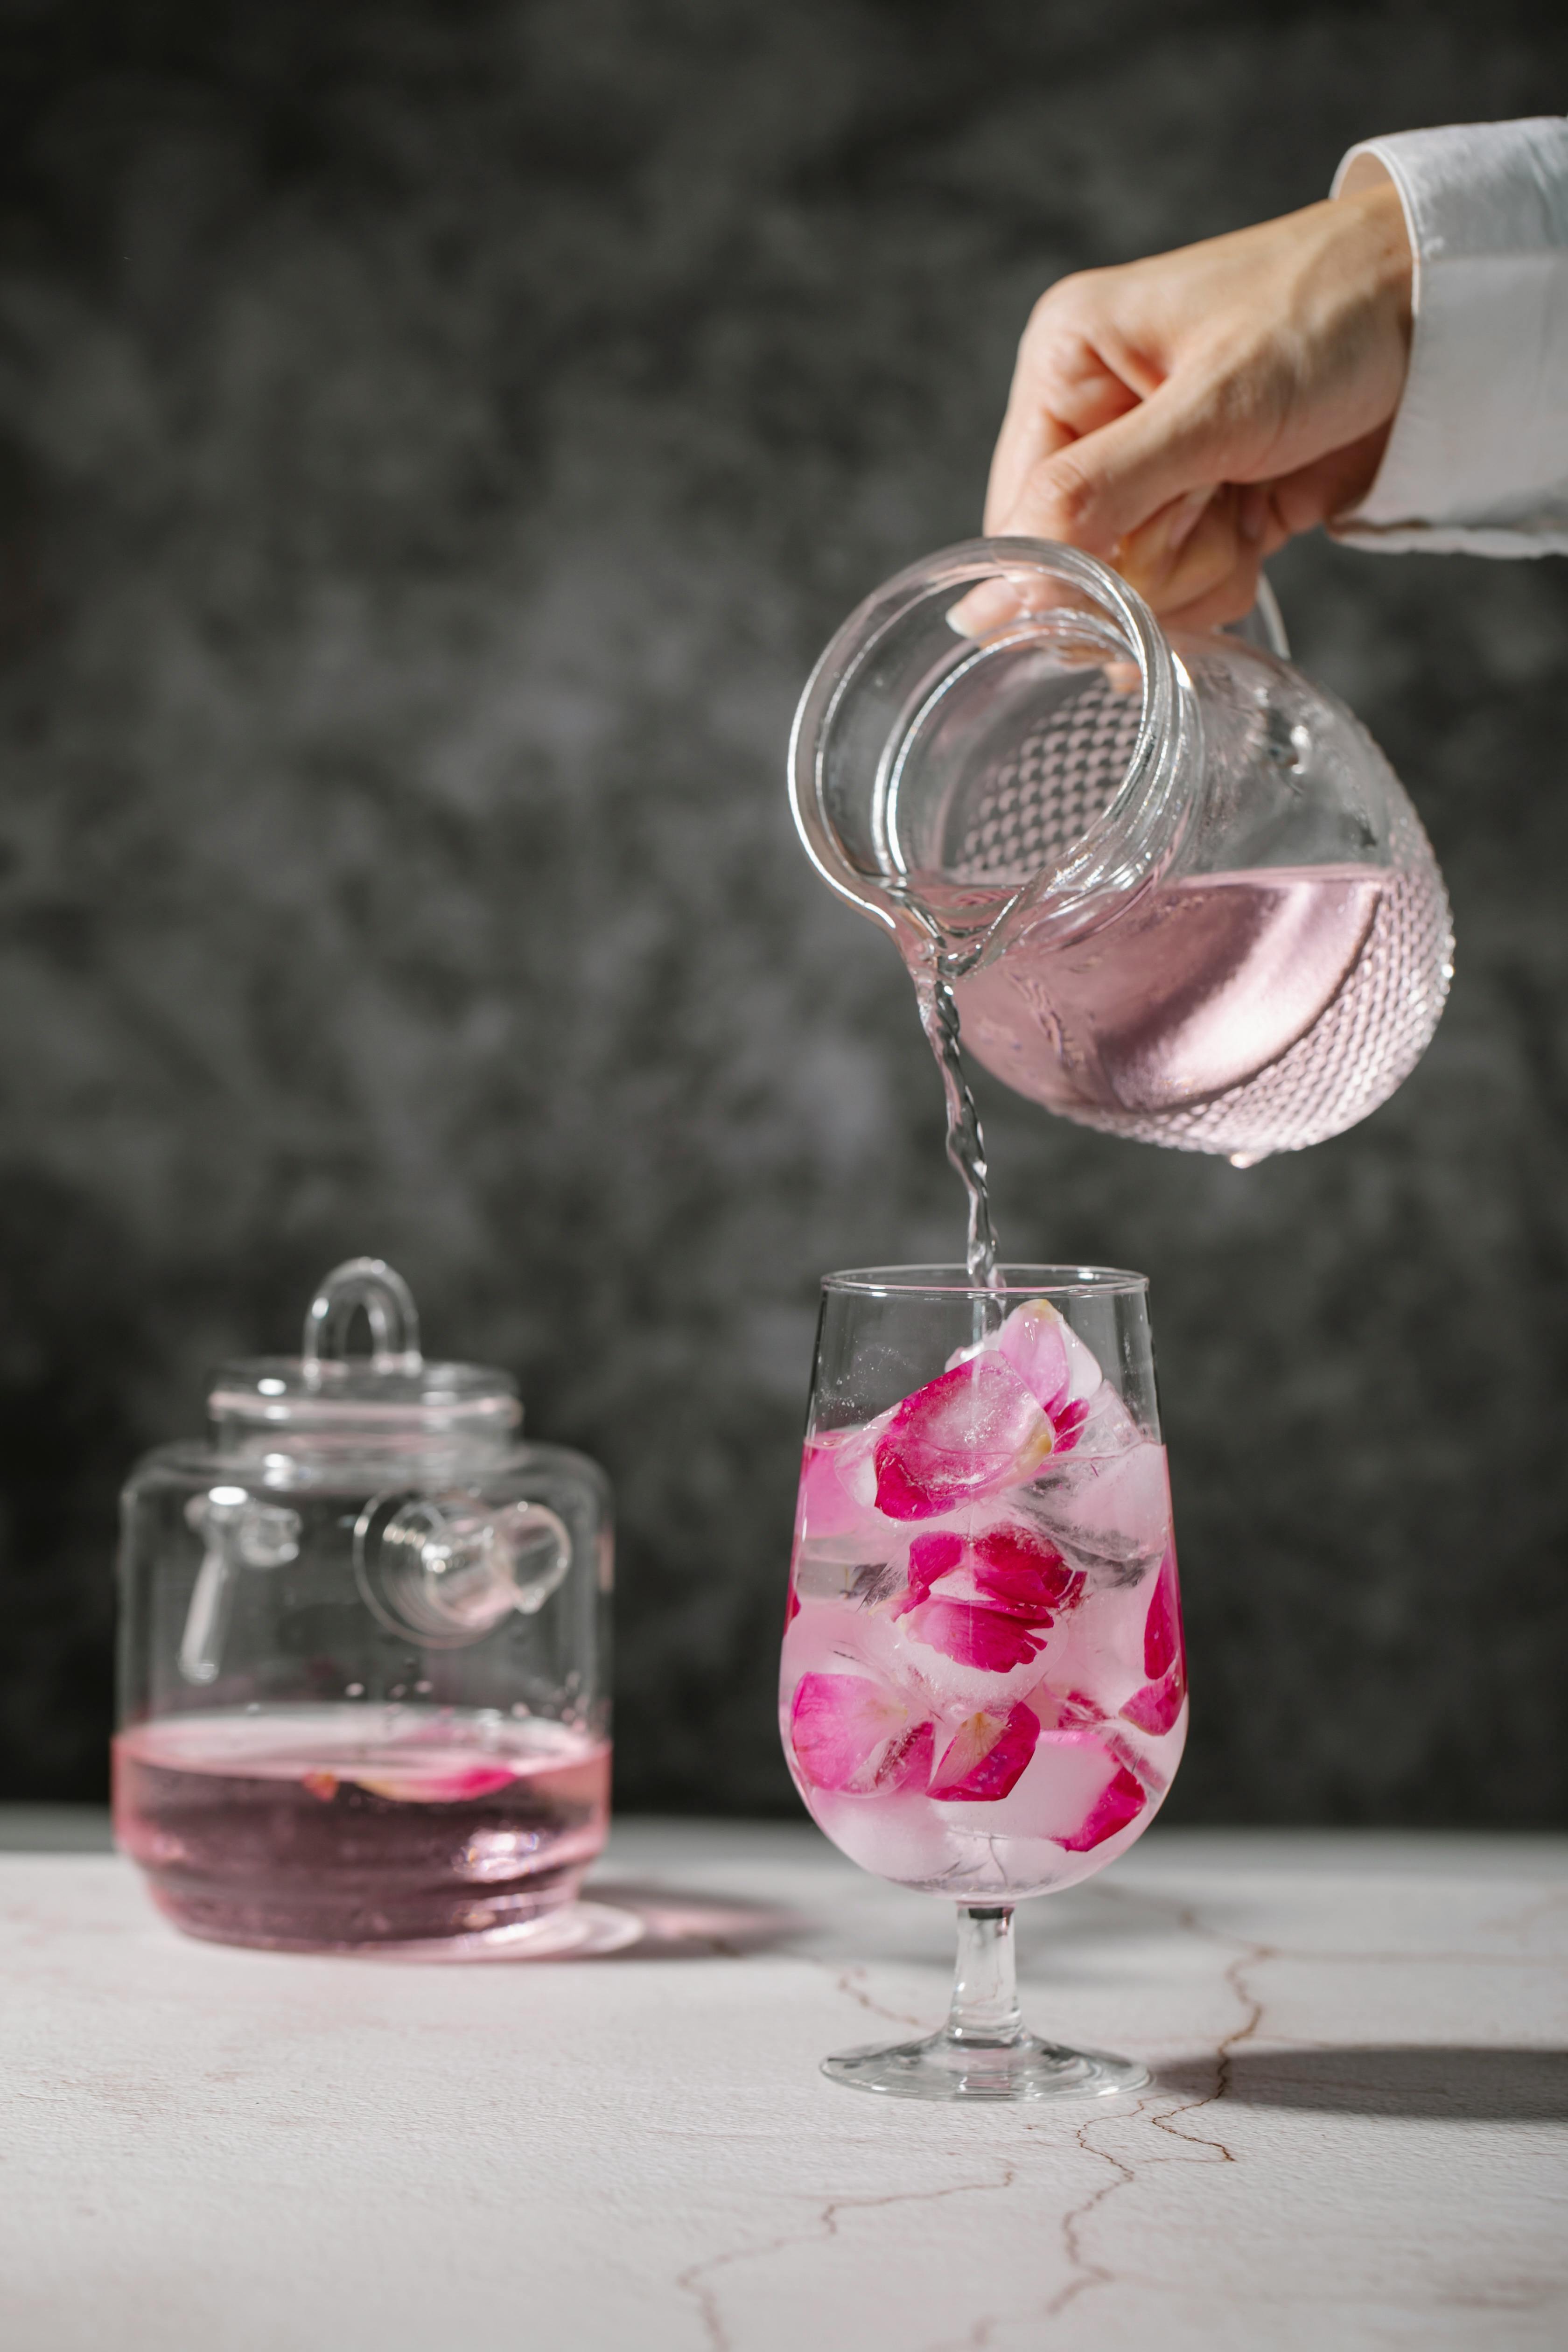 crop person pouring rose water in glass